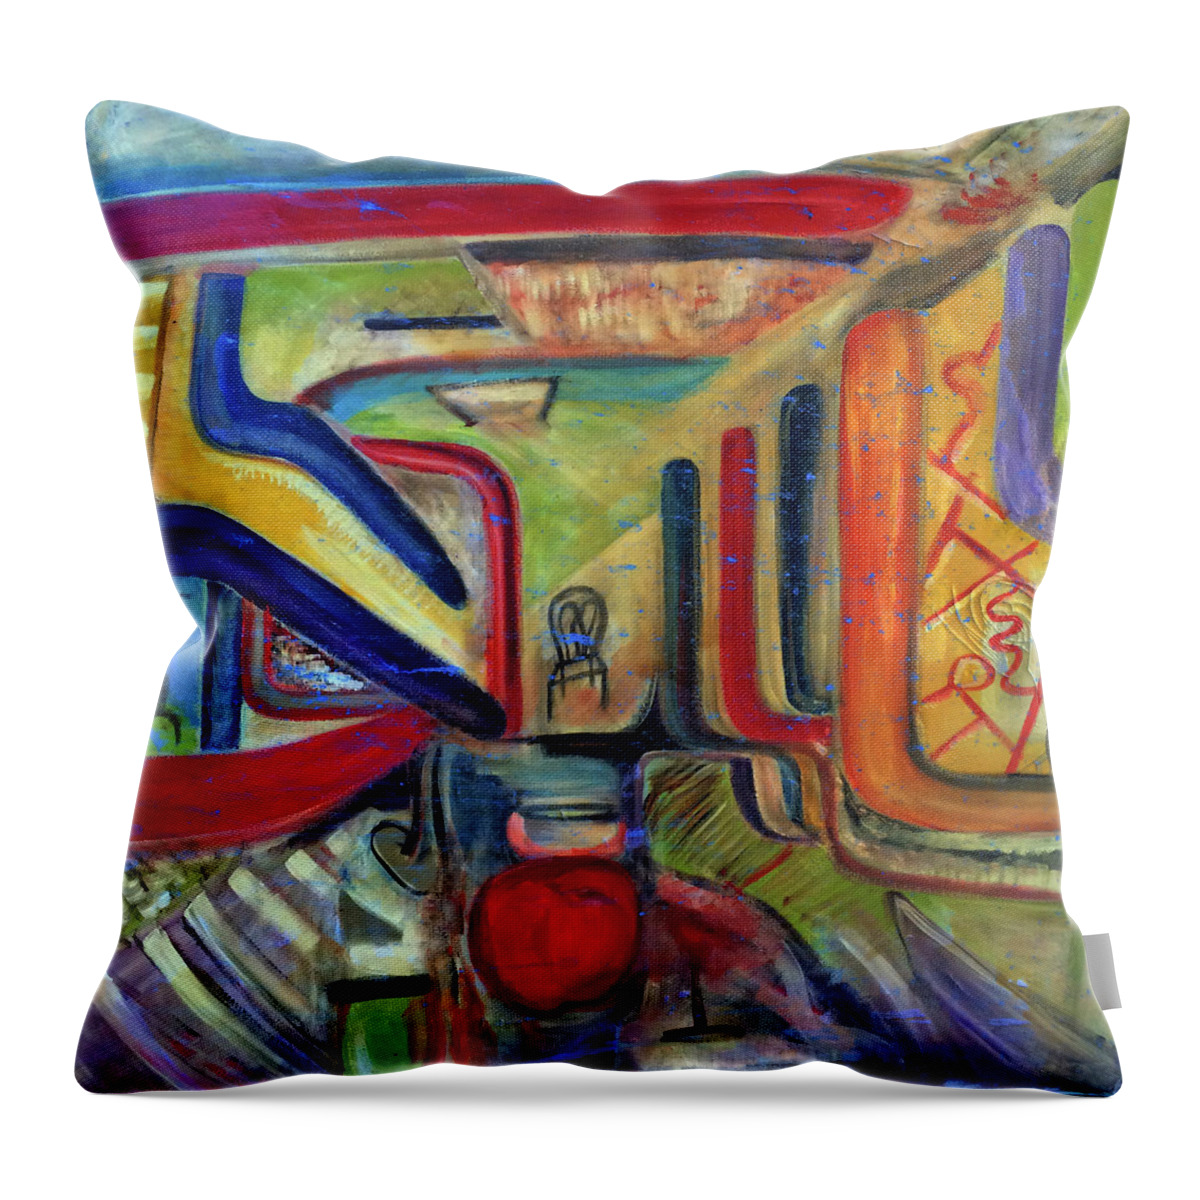 Oil Painting Throw Pillow featuring the painting The FORGOTTEN by Robert R Splashy Art Abstract Paintings